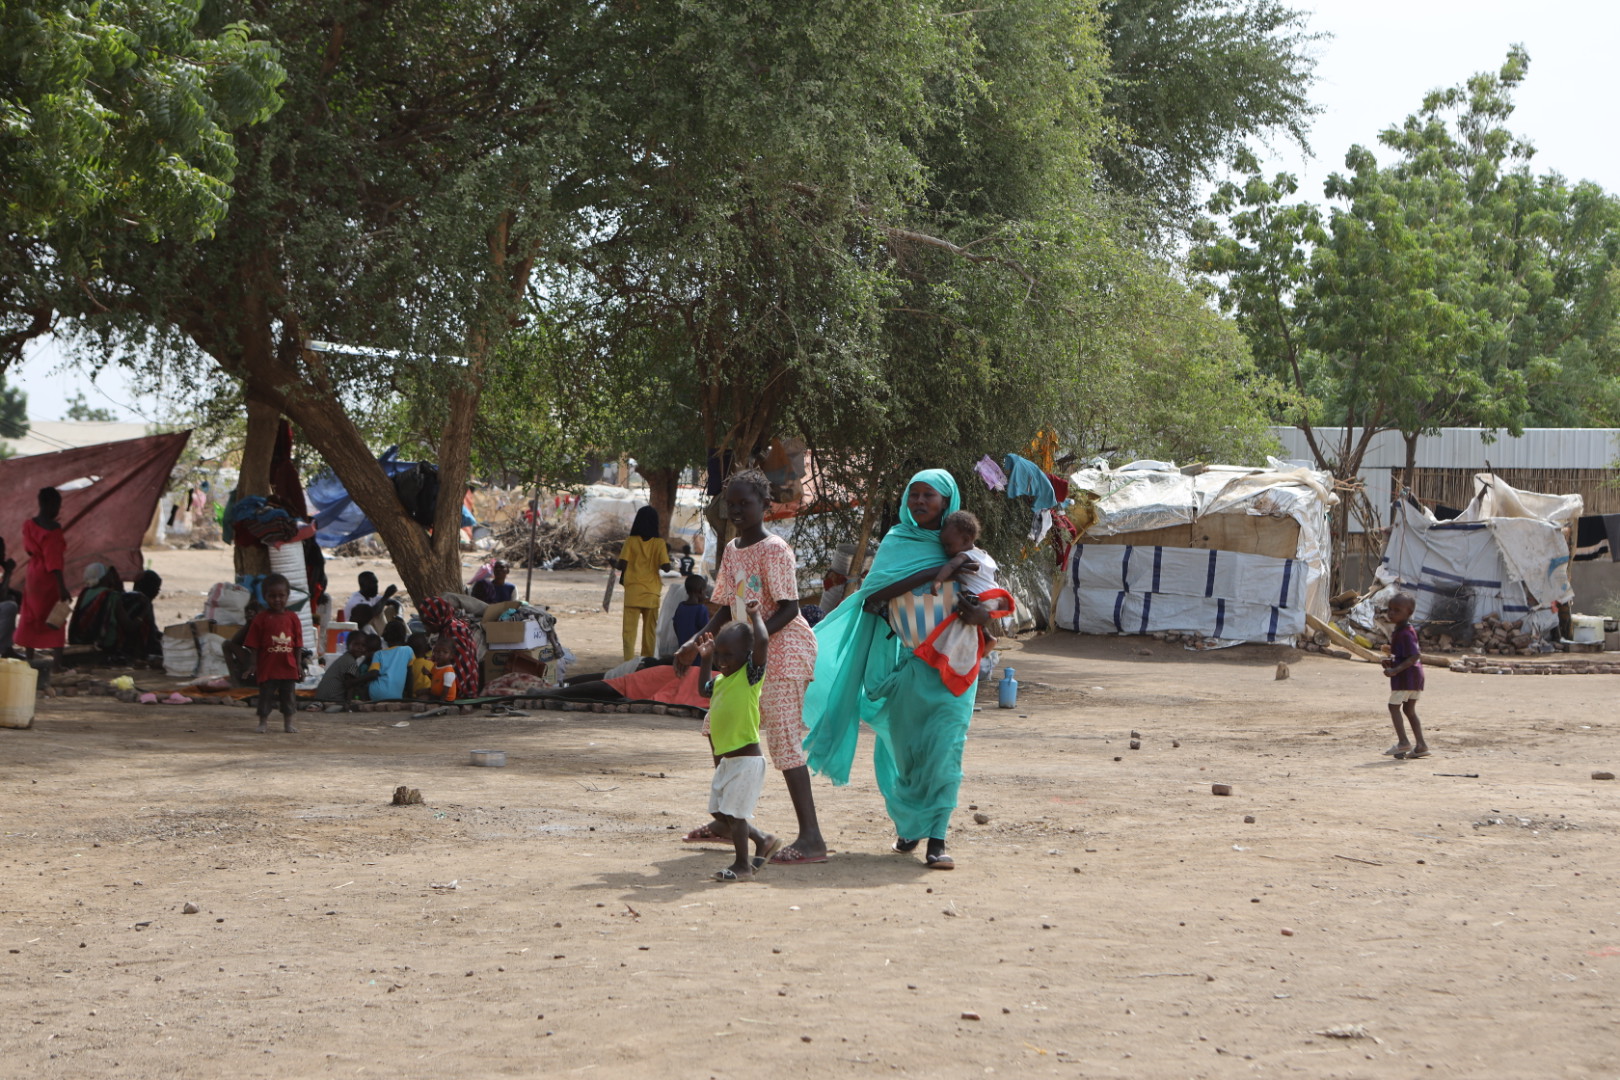 Earlier this year, Human Rights Watch said the Sudanese civil war had created the largest internal displacement crisis in the world (Faiz Abubakr)